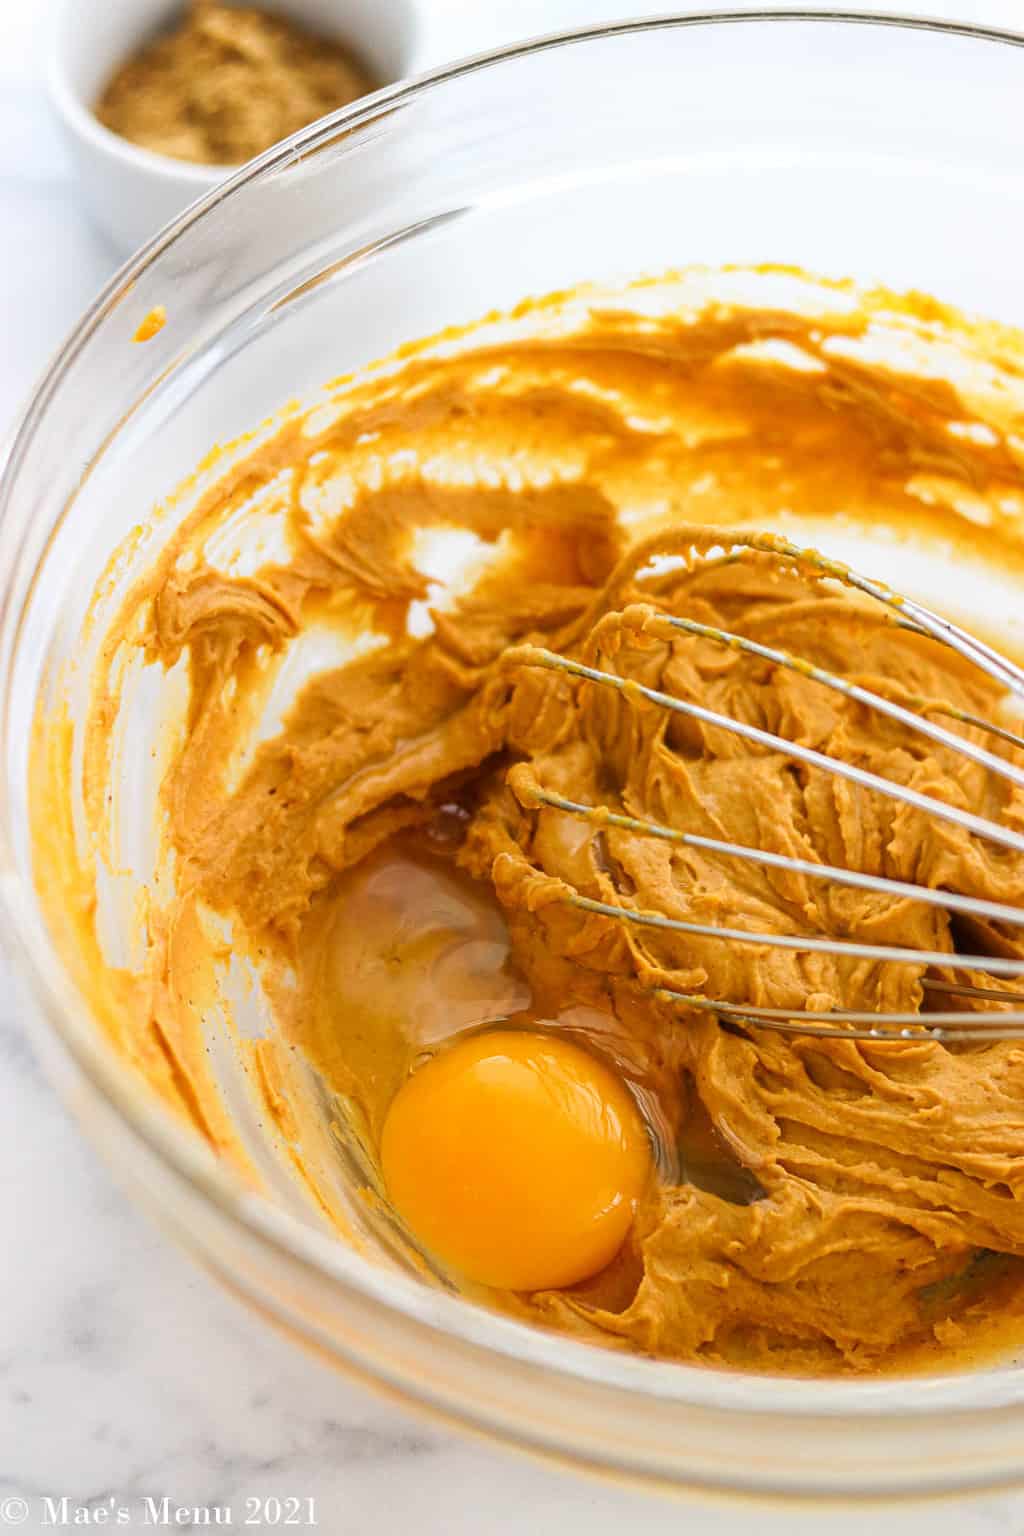 An egg in with the peanut butter and pumpkin mixture